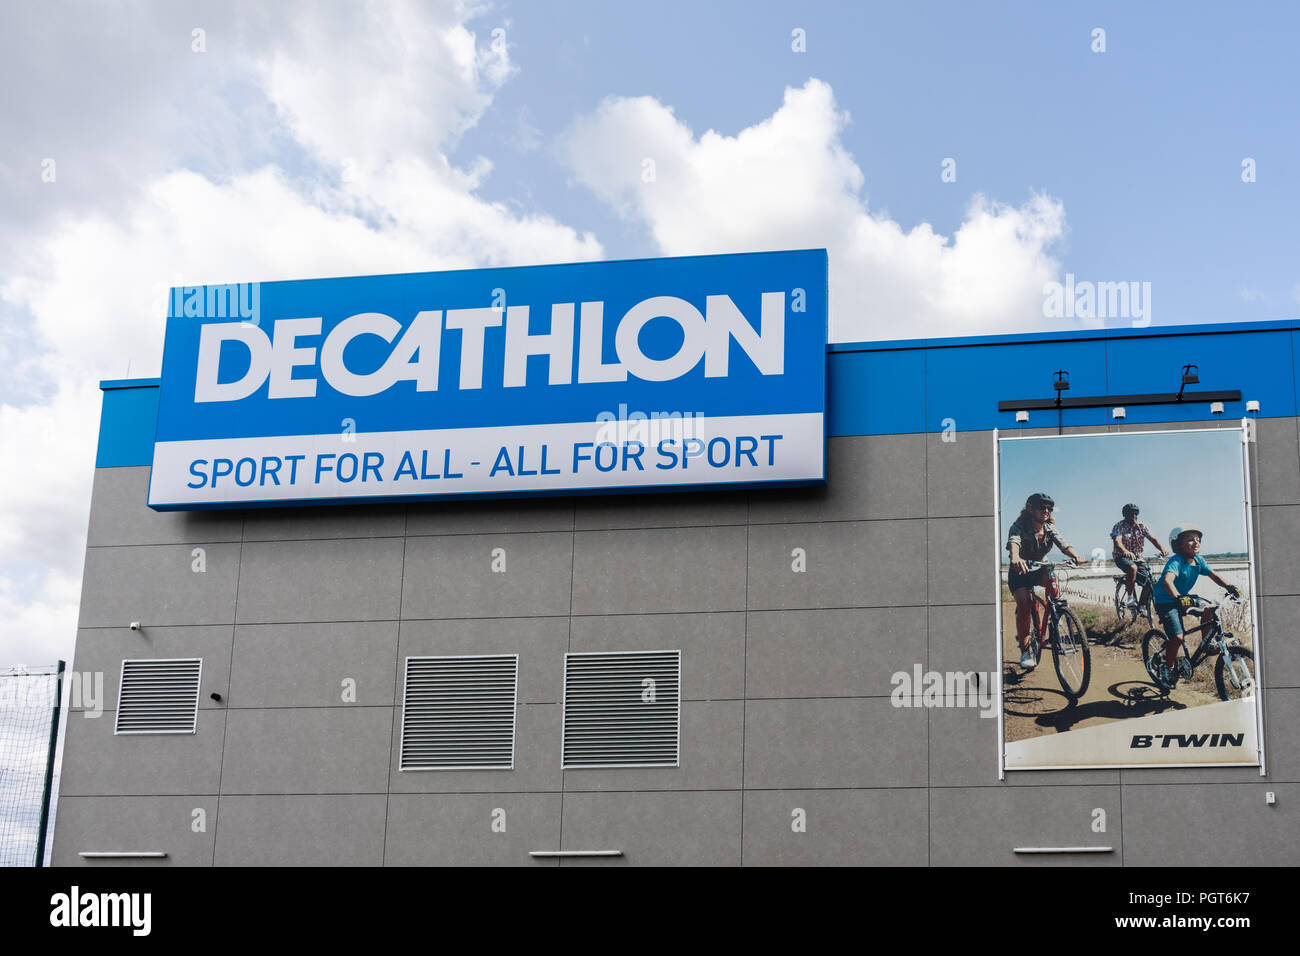 Decathlon Sign High Resolution Stock Photography and Images - Alamy